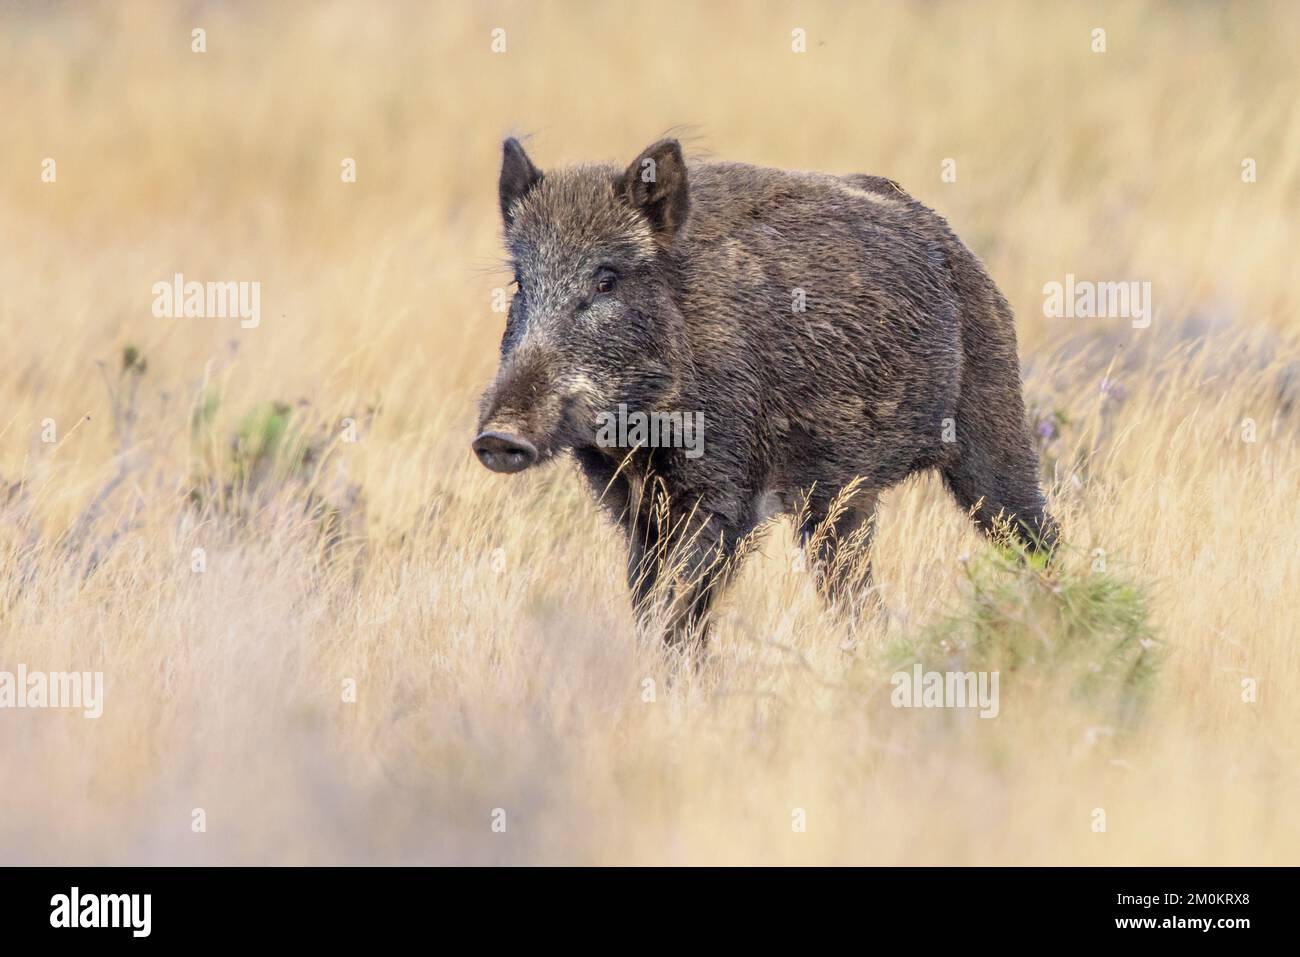 Wild boar (Sus scrofa). This animal is a suid native to much of Eurasia and North Africa, and has been introduced to the Americas and Oceania. Stock Photo